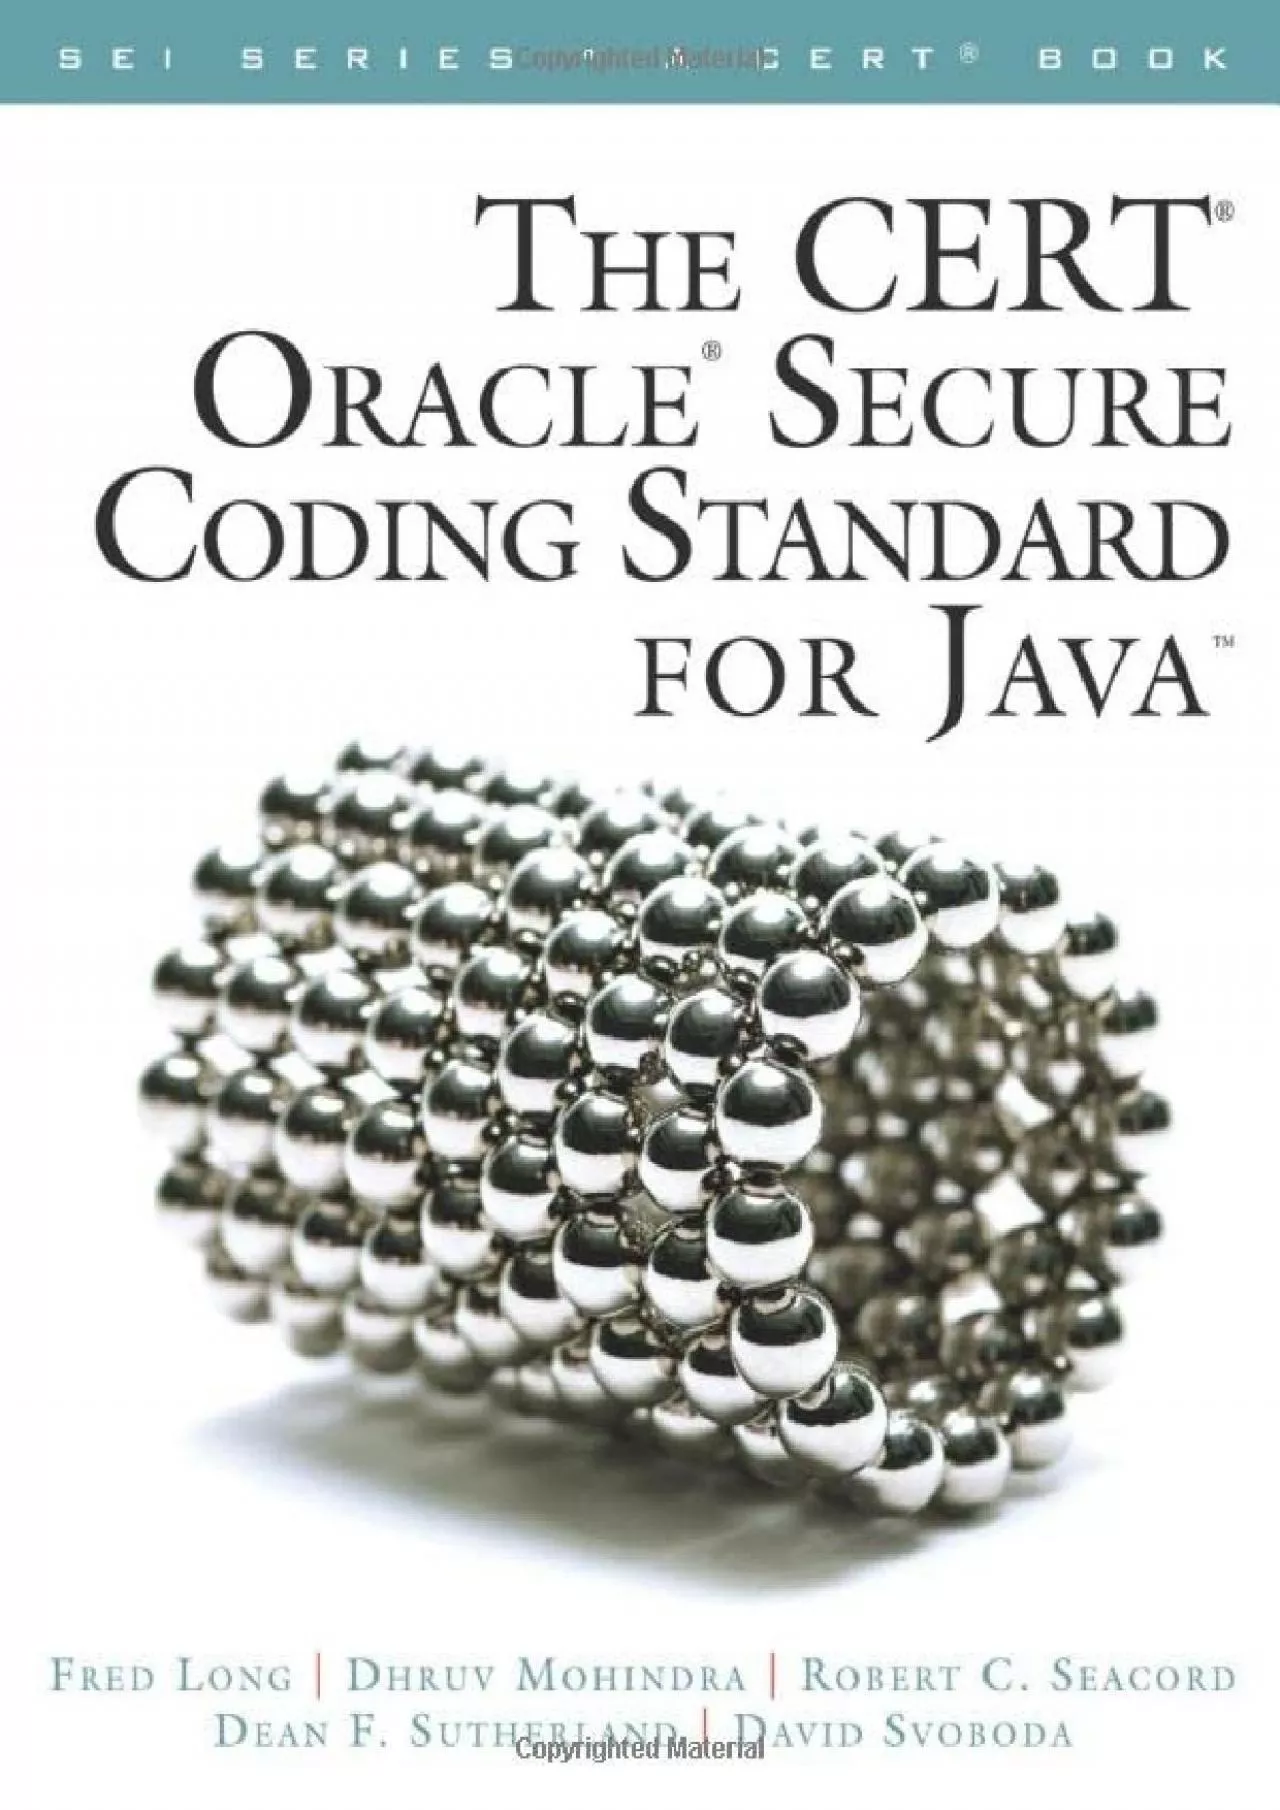 [READING BOOK]-CERT Oracle Secure Coding Standard for Java, The (SEI Series in Software